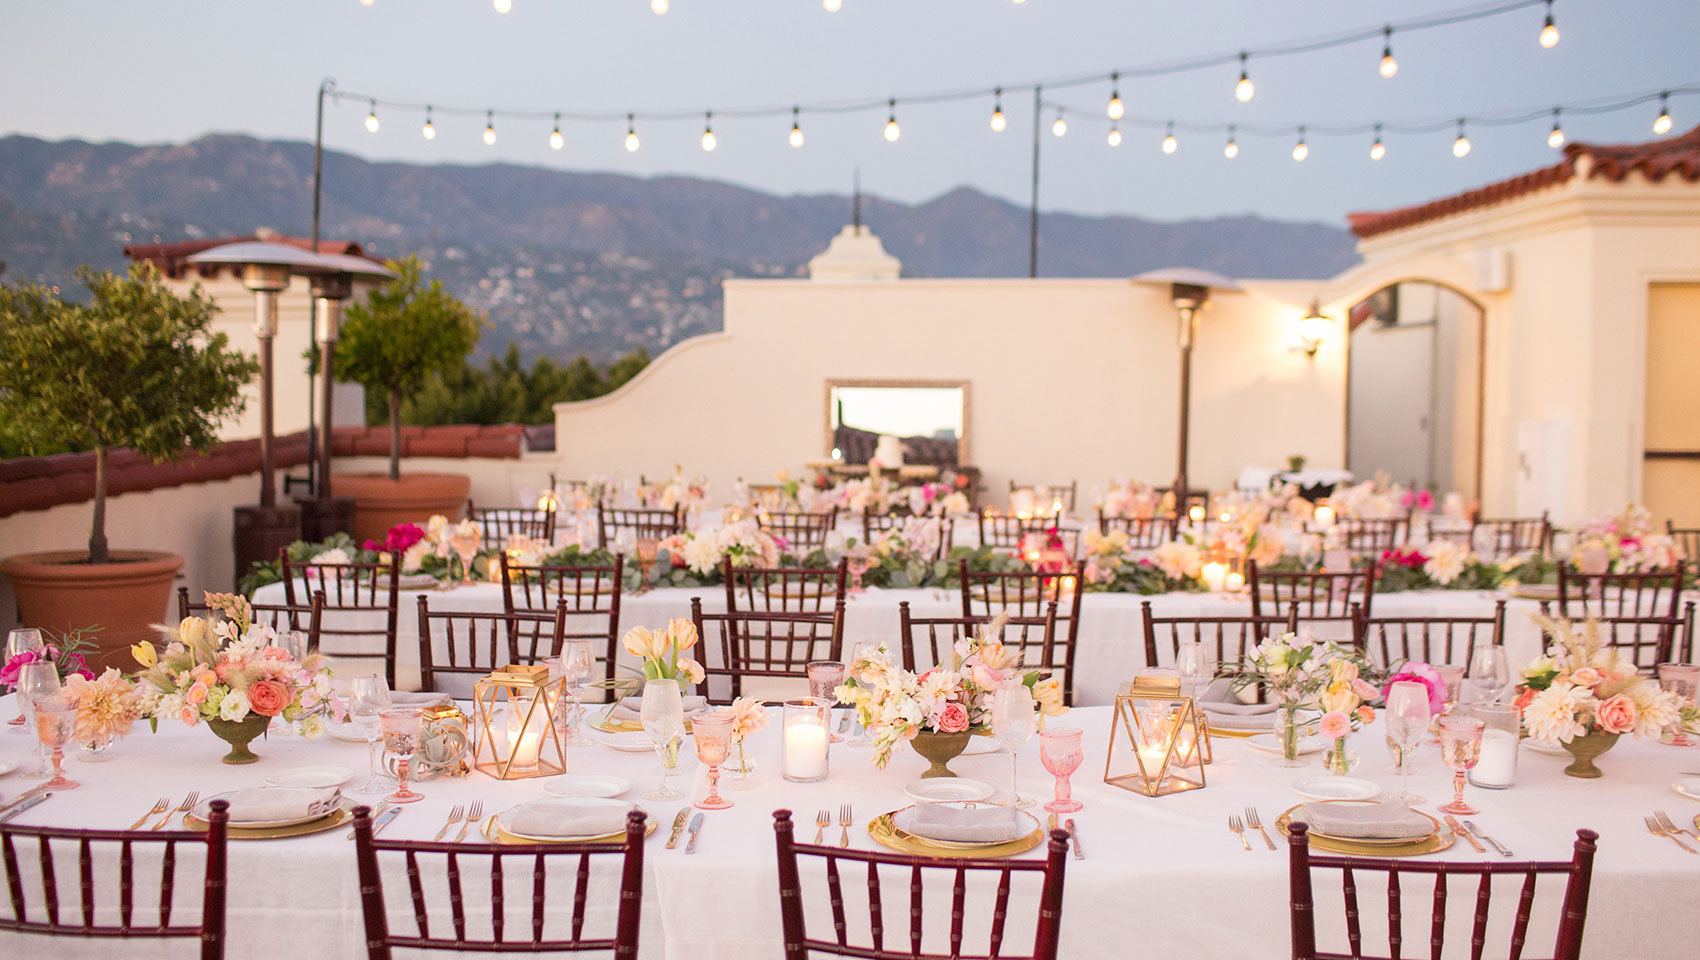 Great Santa Barbara Small Wedding Venues of all time The ultimate guide 